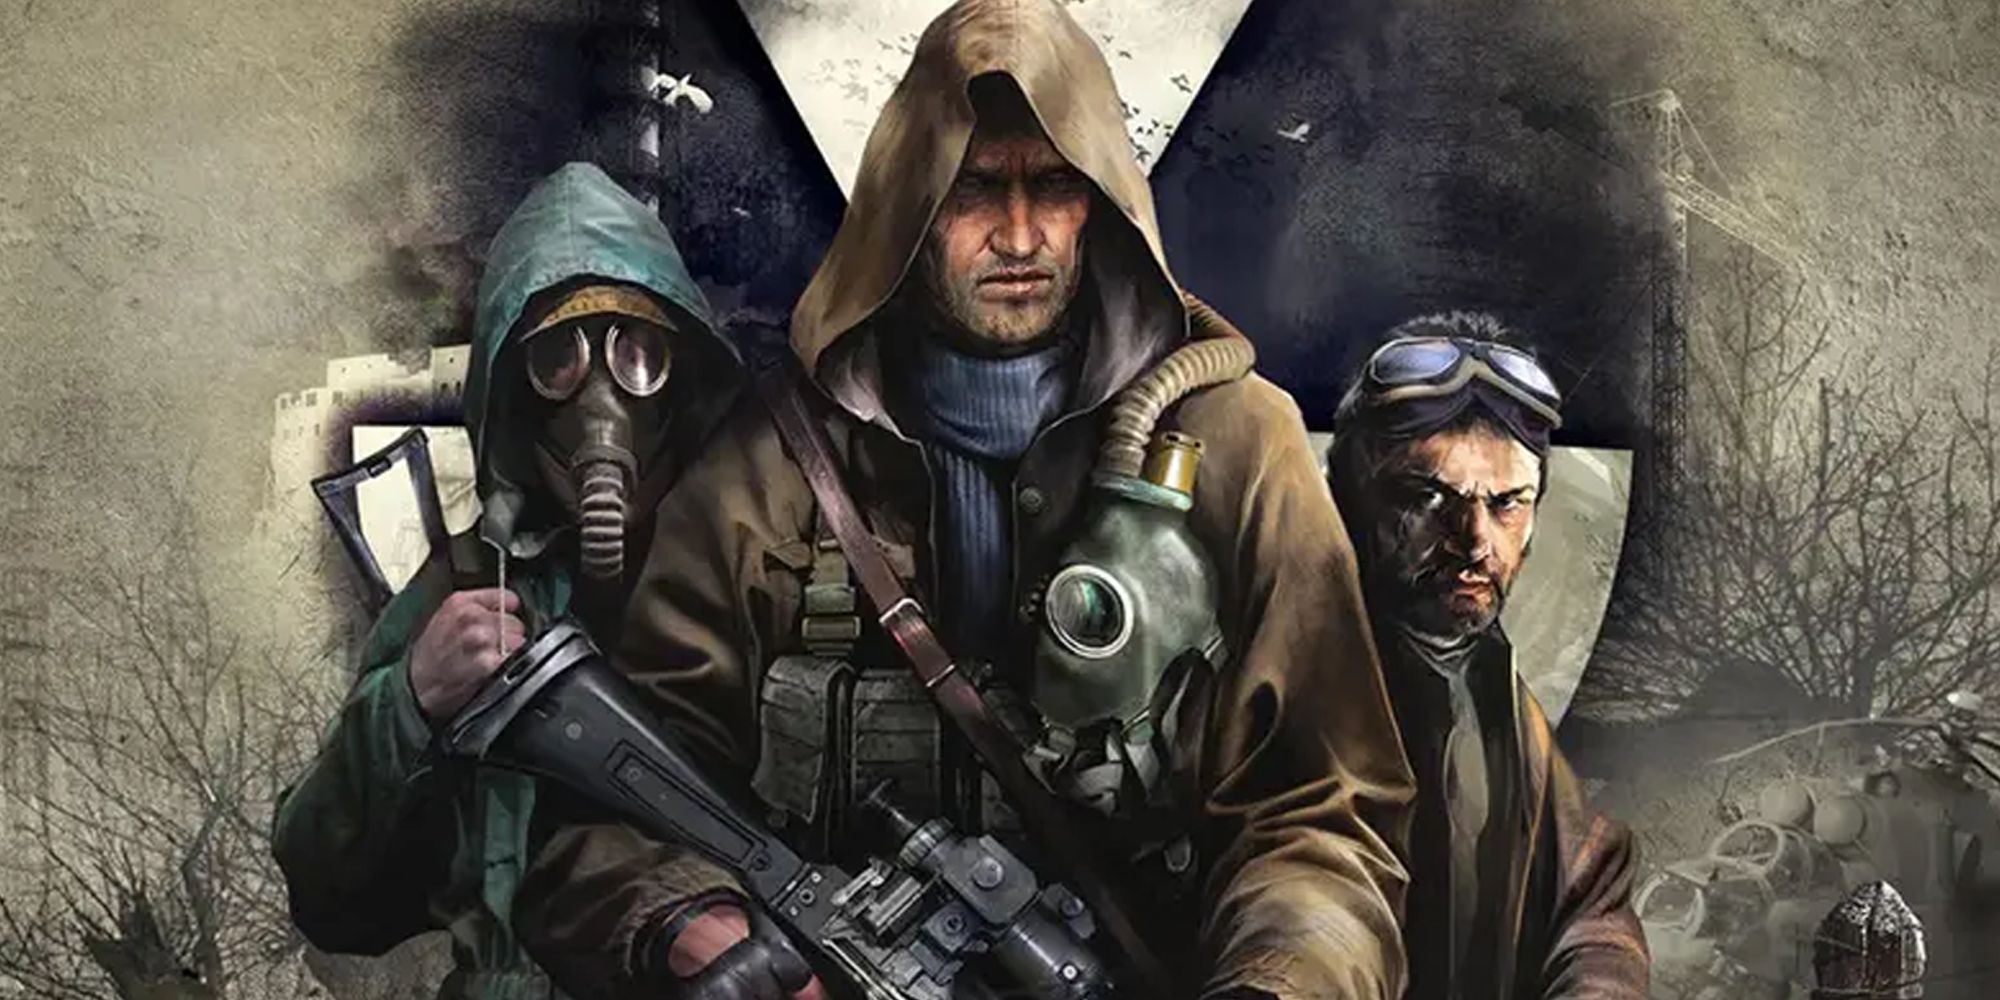 S.T.A.L.K.E.R Legends of the Zone Trilogy's key art featuring three of the main characters against a nuclear symbol